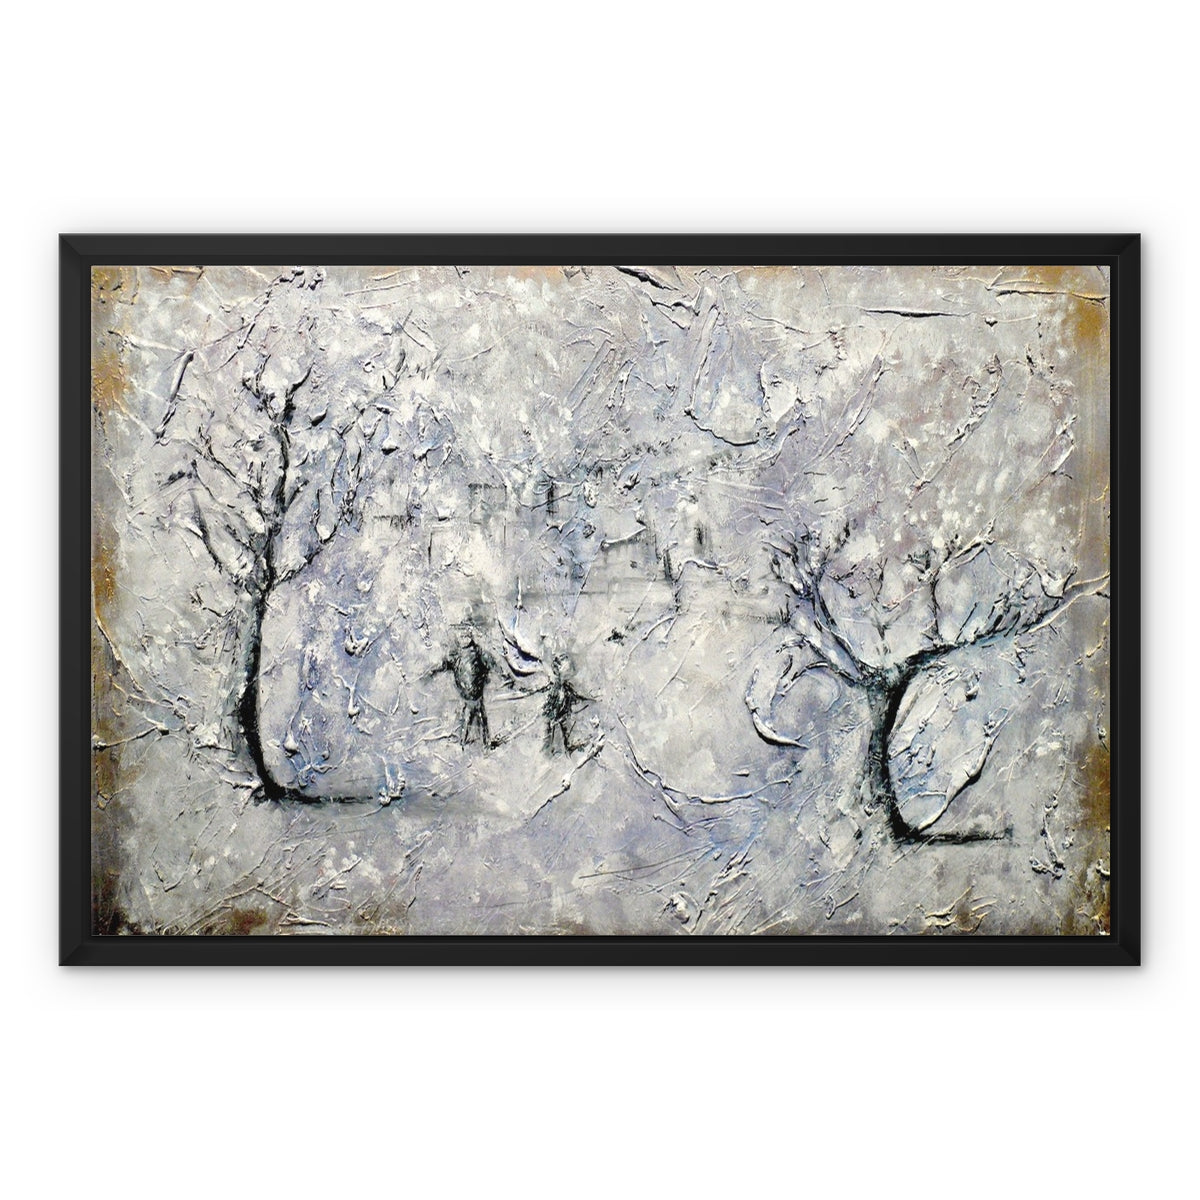 Father Daughter Snow Painting | Framed Canvas From Scotland-Floating Framed Canvas Prints-Abstract & Impressionistic Art Gallery-24"x18"-Paintings, Prints, Homeware, Art Gifts From Scotland By Scottish Artist Kevin Hunter